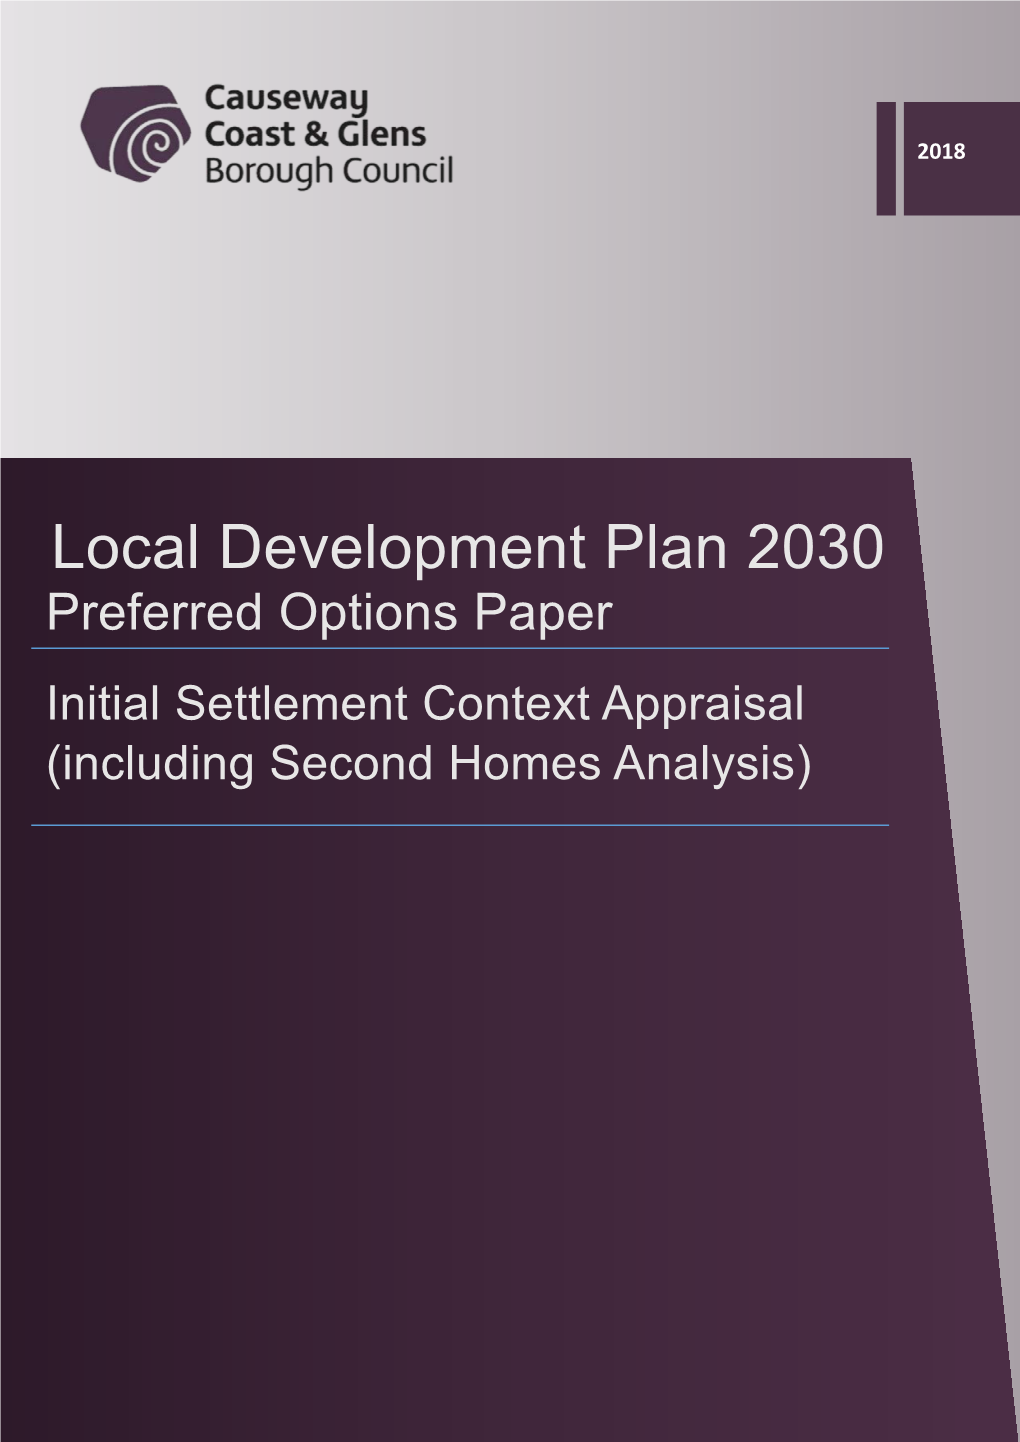 Local Development Plan 2030 Preferred Options Paper Initial Settlement Context Appraisal (Including Second Homes Analysis)